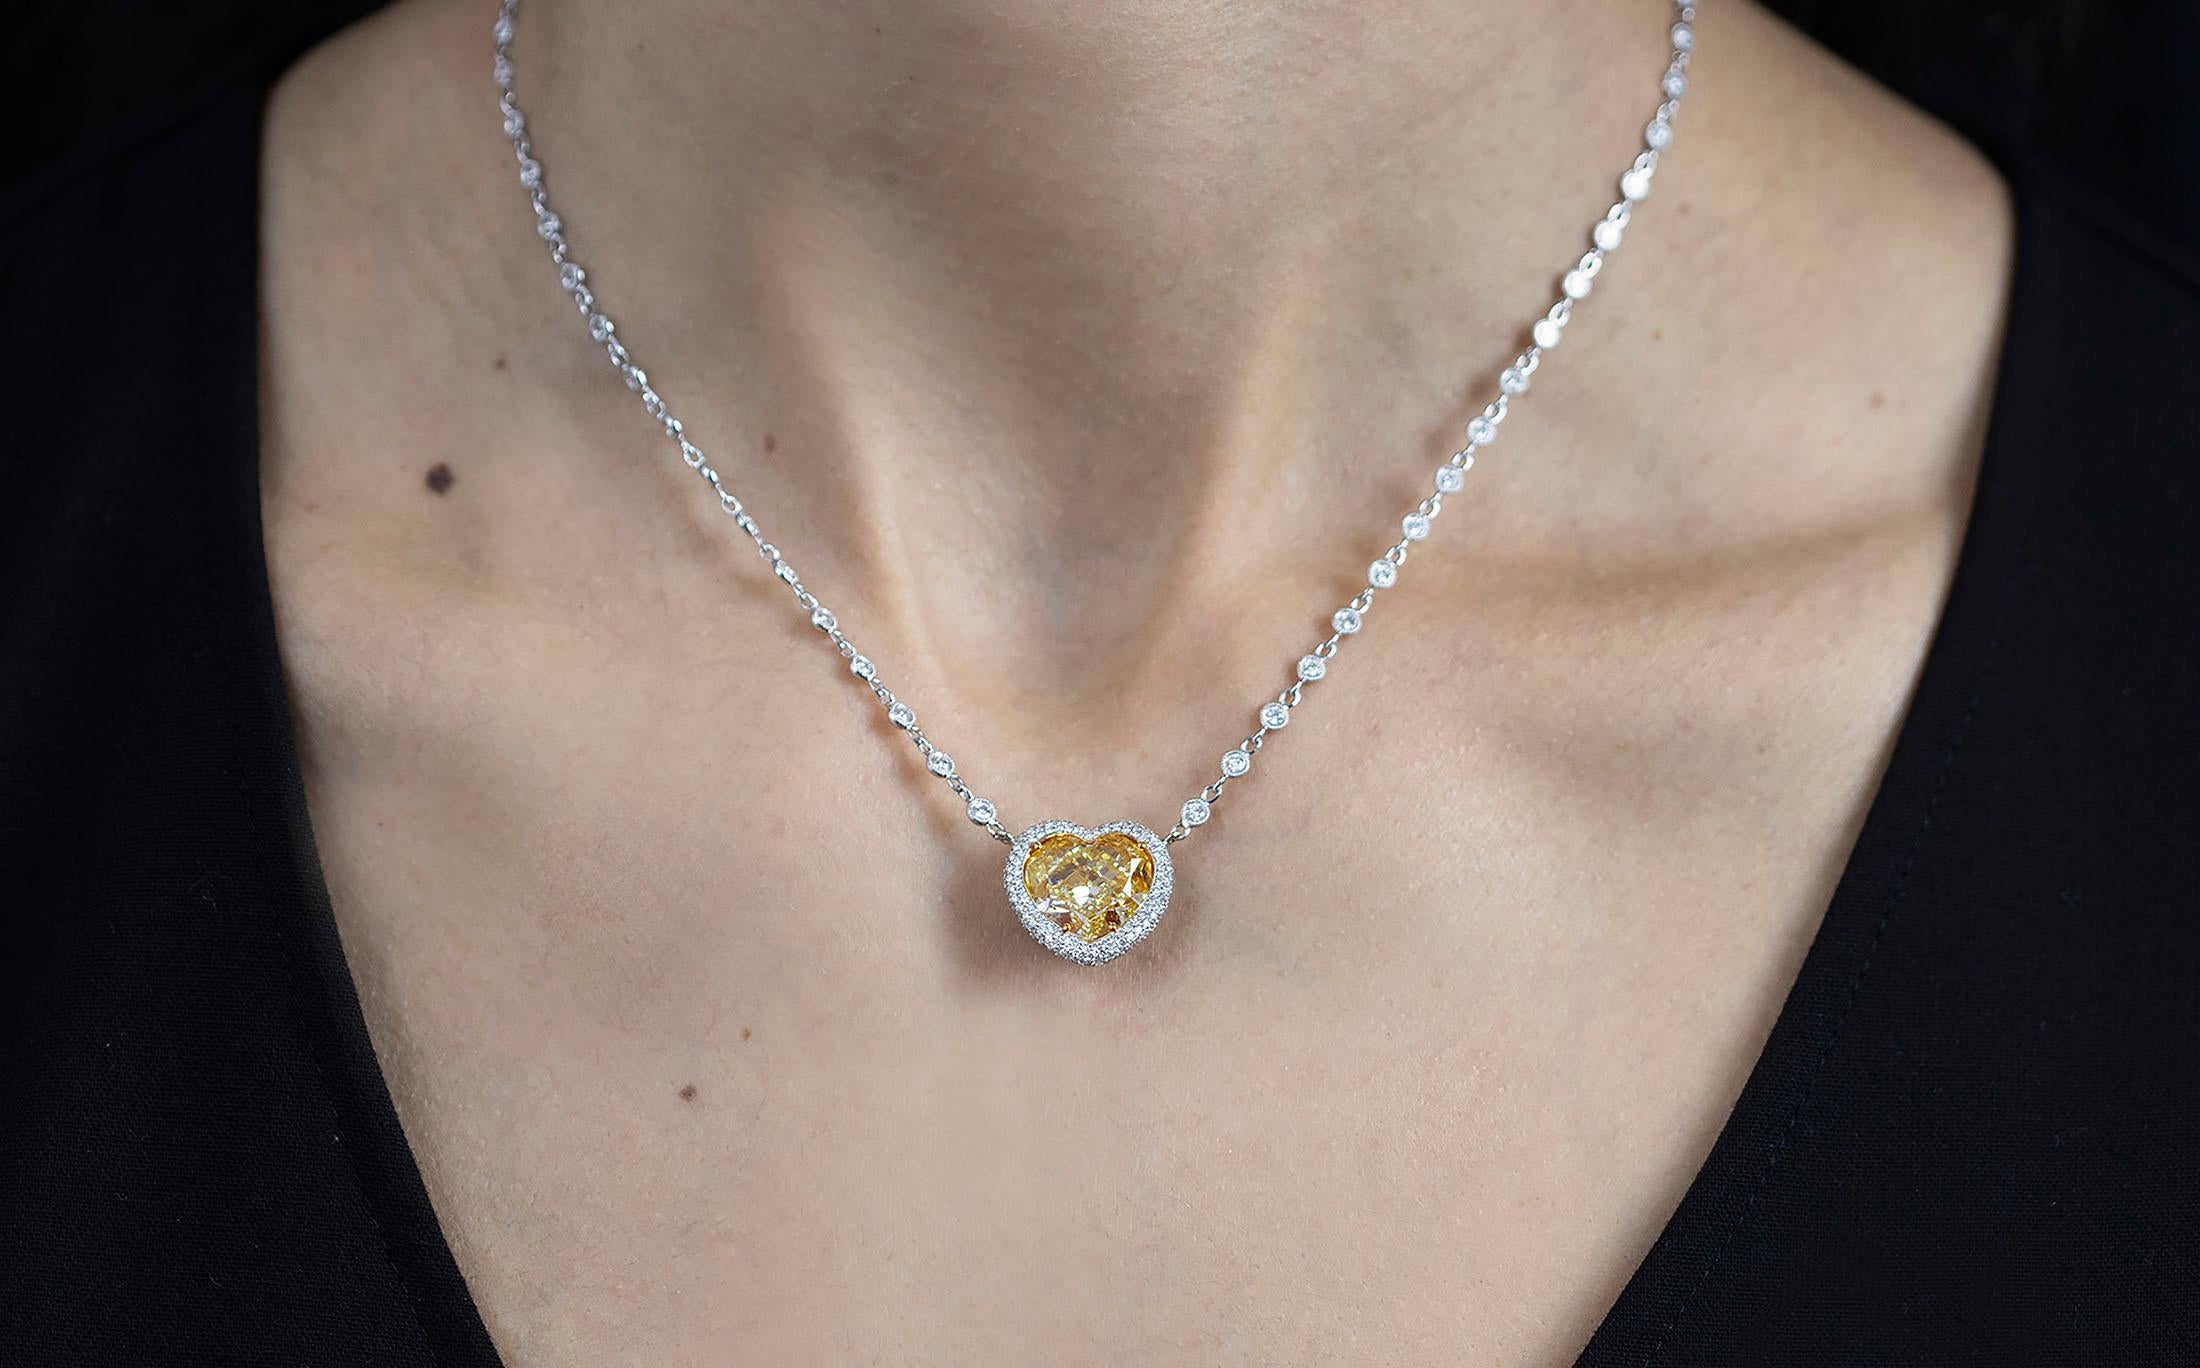 Mixed Cut GIA Certified 7.77 Heart Shape Yellow Diamond Double-Sided Pendant Necklace For Sale